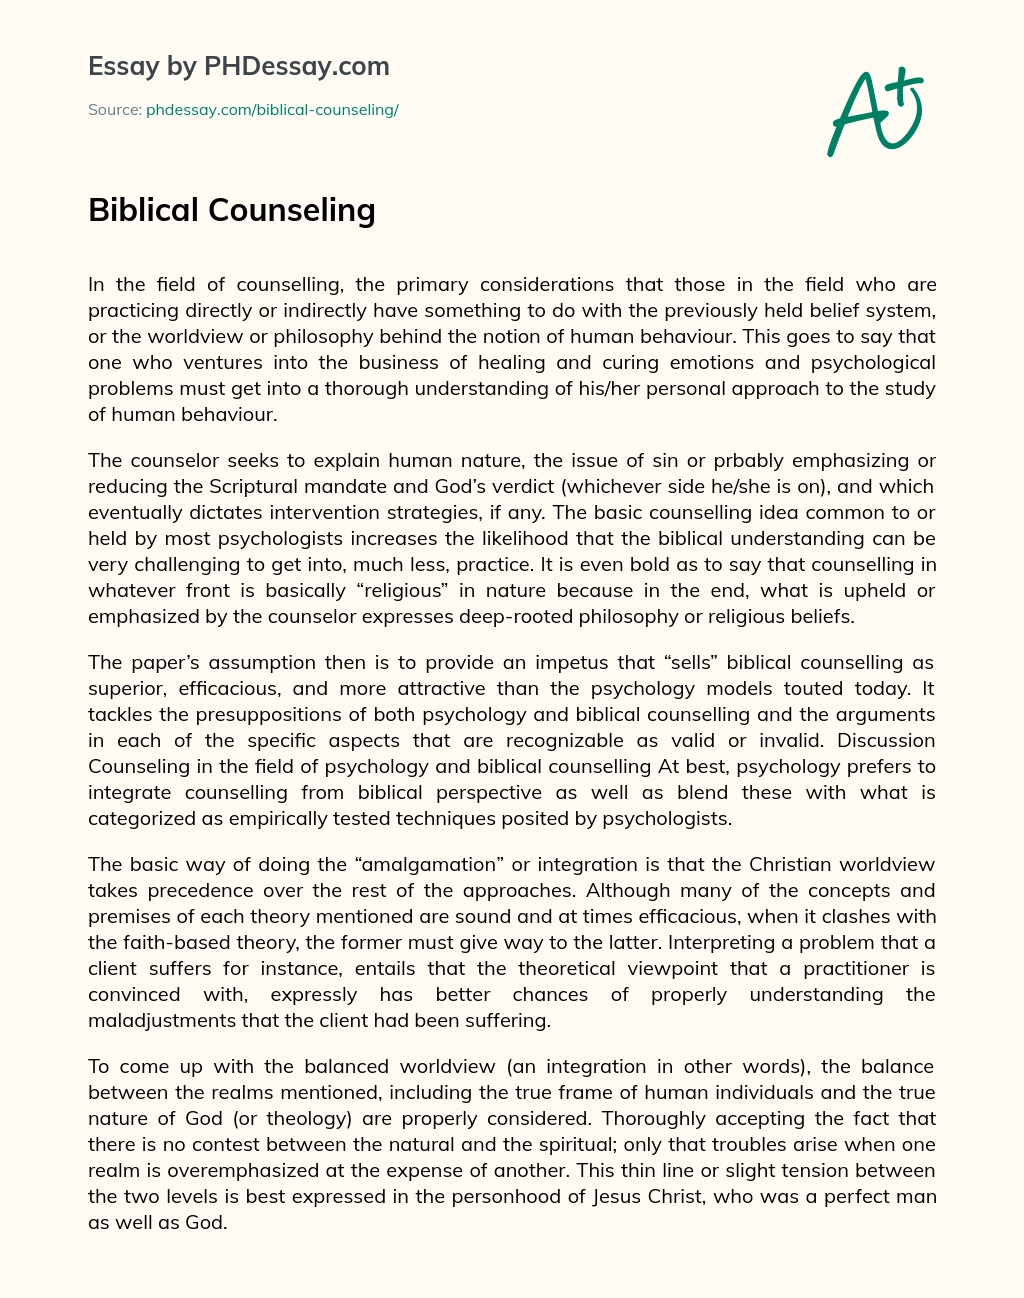 Biblical Counseling essay